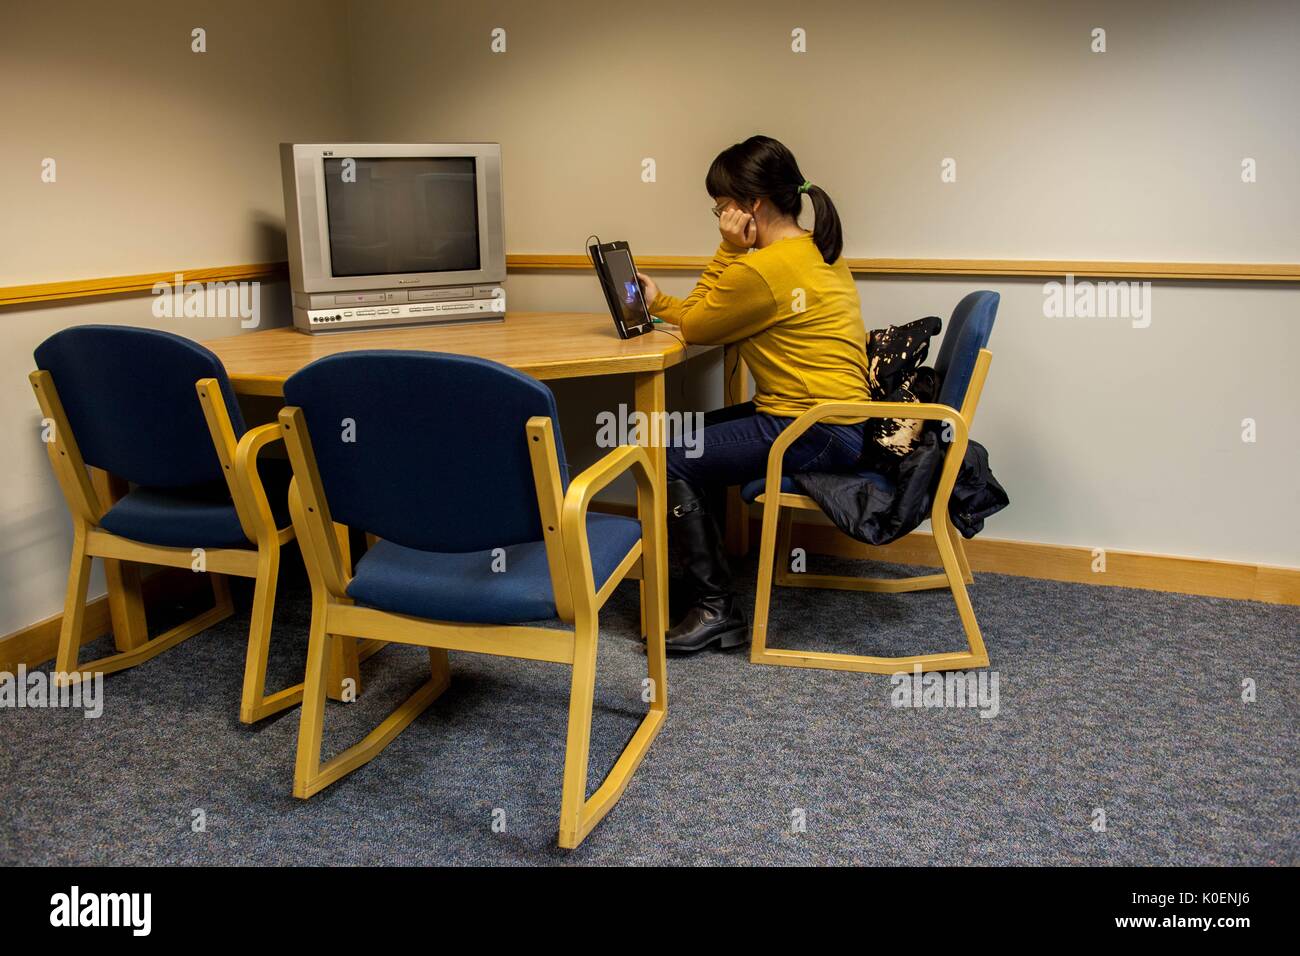 Student on iPad in Milton S. Eisenhower Library of Johns Hopkins University to juxtapose an obsolete television set with newer technology, 1996. Courtesy Eric Chen. Stock Photo